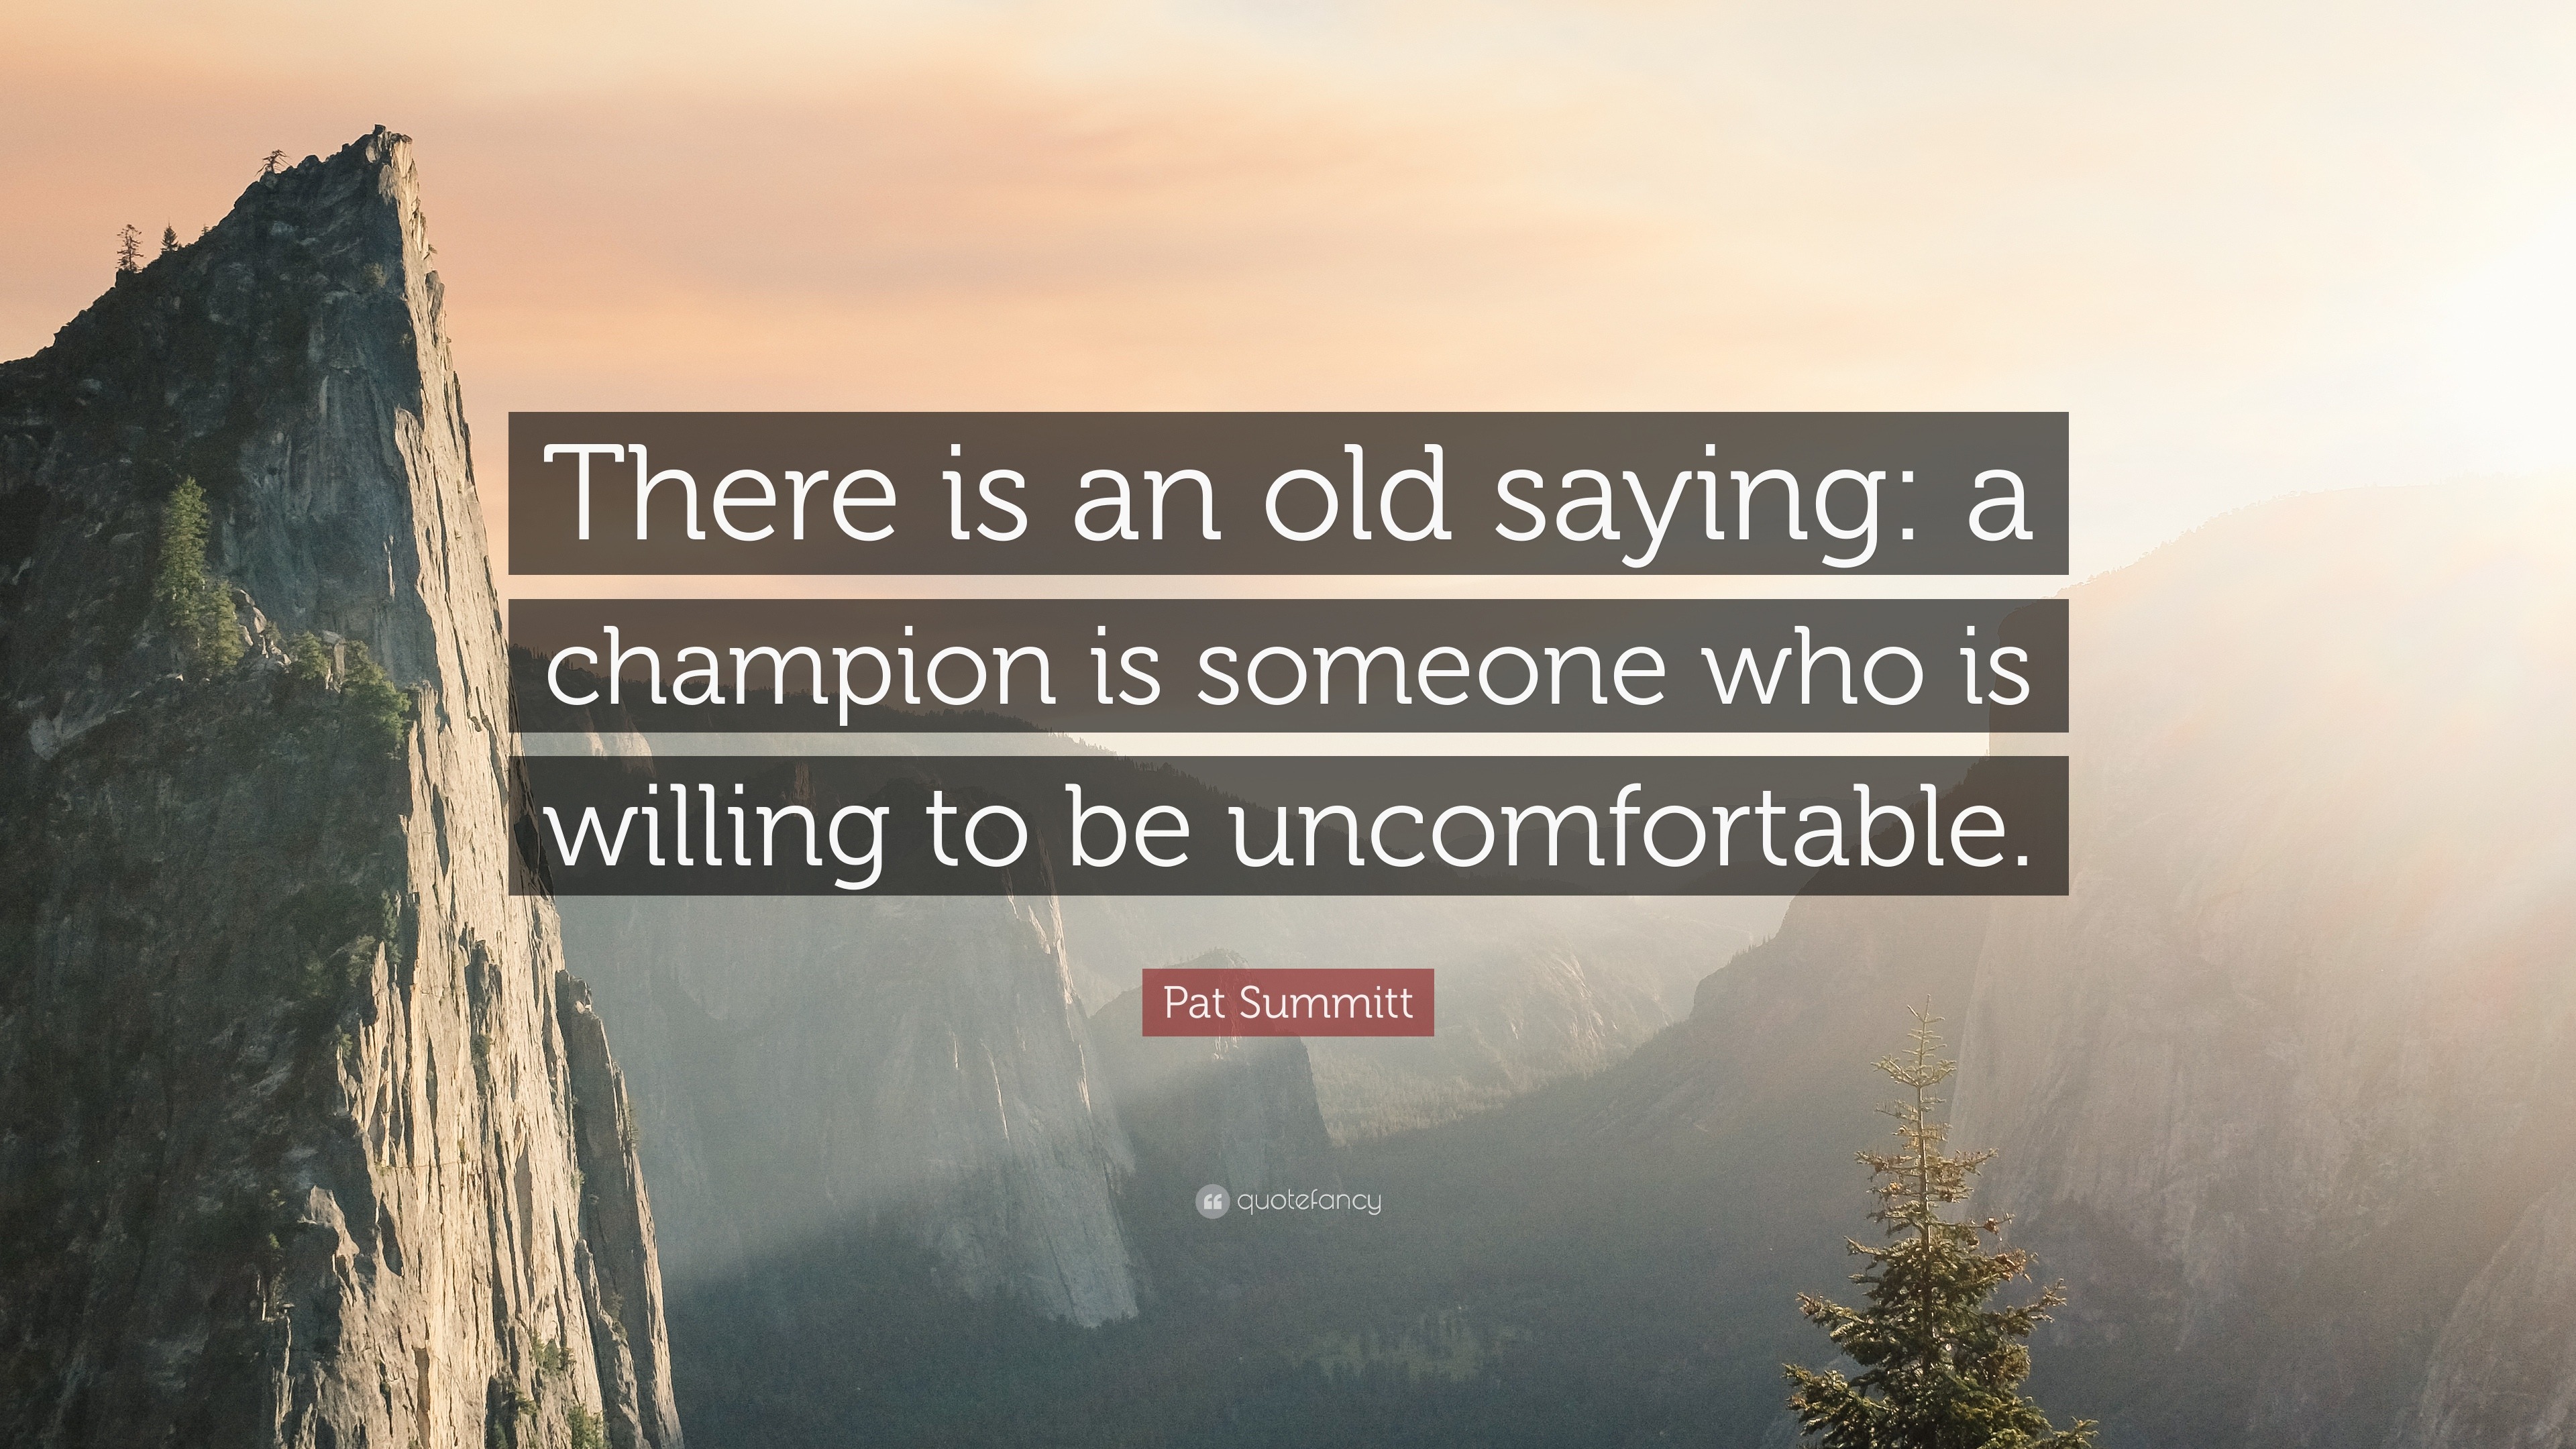 Summitt “There is an old a champion someone who is willing to